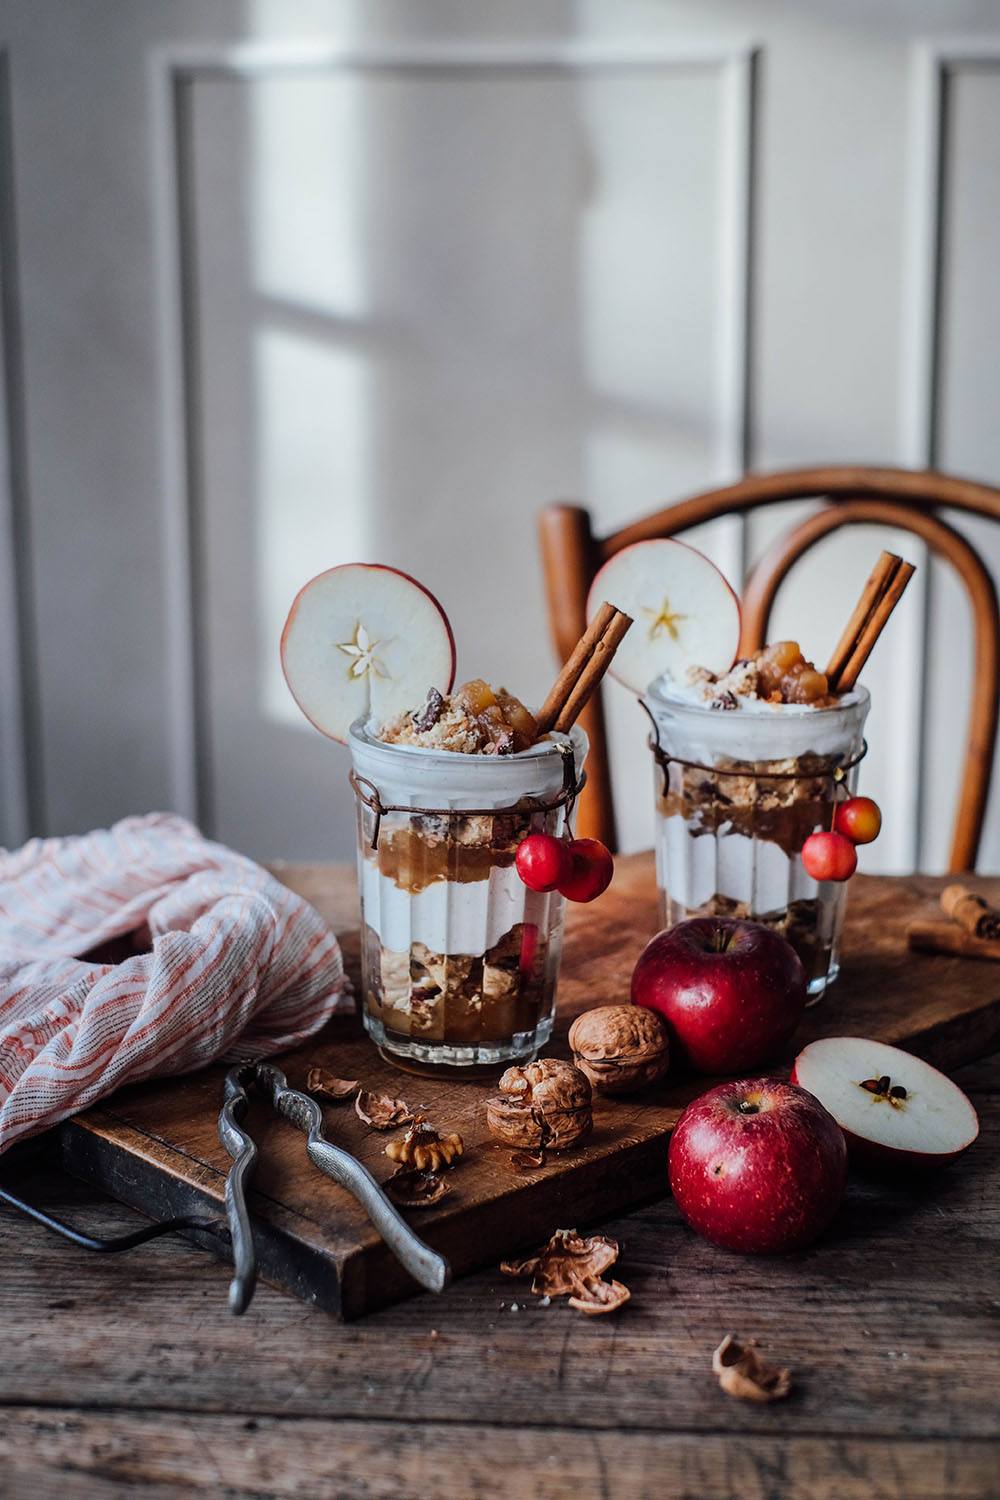 Gluten-free Apple Crumble in a Glass with Walnuts and Oats